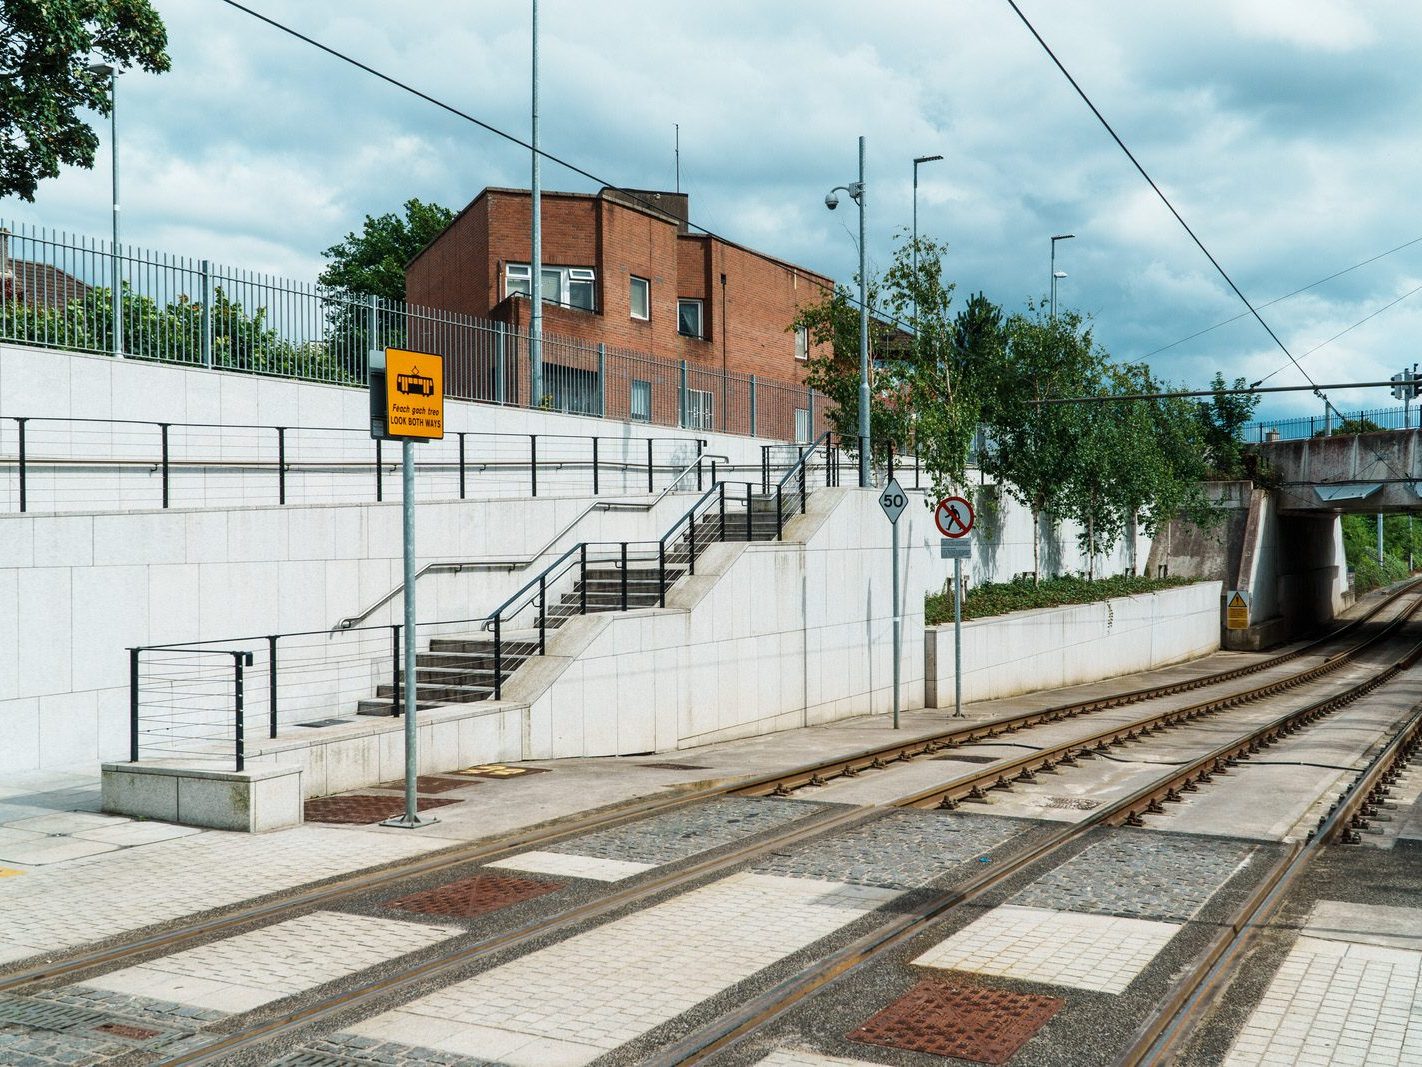 CABRA LUAS TRAM STOP ON CONNAUGHT STREET [GOOGLE BARD INCORRECTLY CLAIMED THAT THERE IS A PUBLIC TOILET AND A TICKET OFFICE] 002